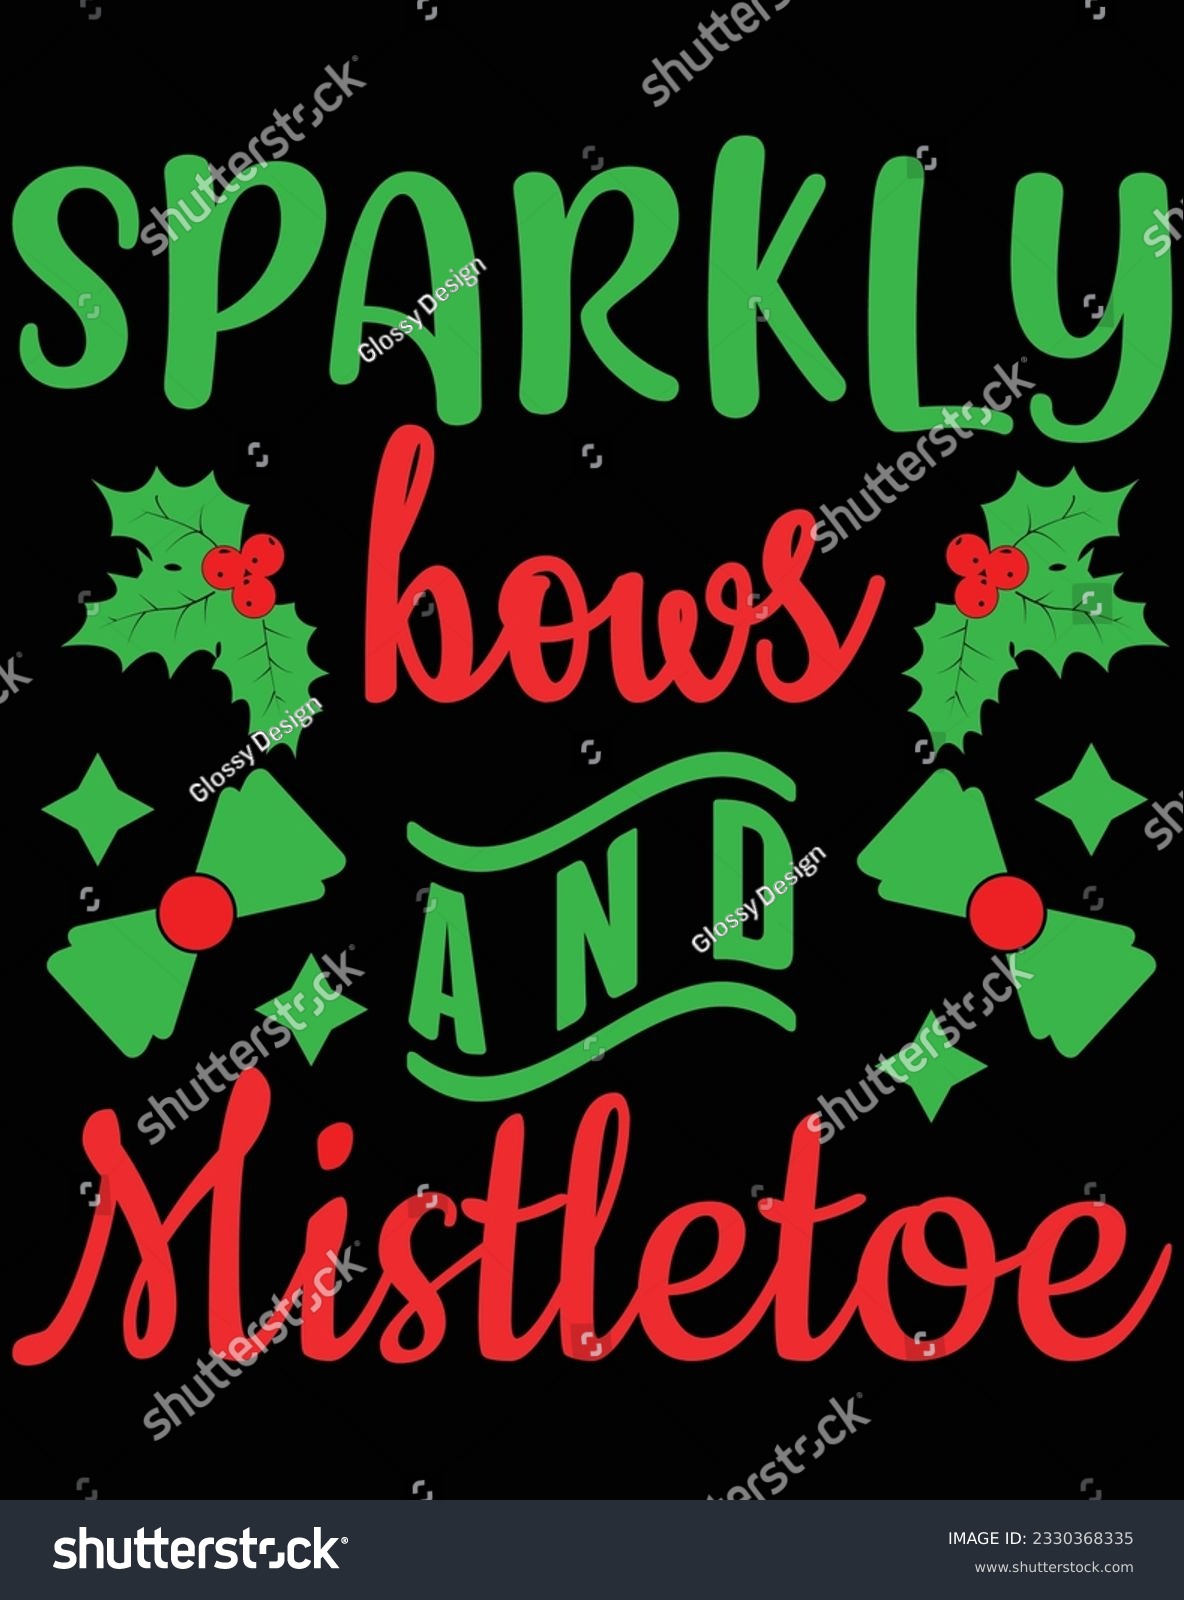 SVG of Sparkly bows and mistletoe EPS file for cutting machine. You can edit and print this vector art with EPS editor. svg